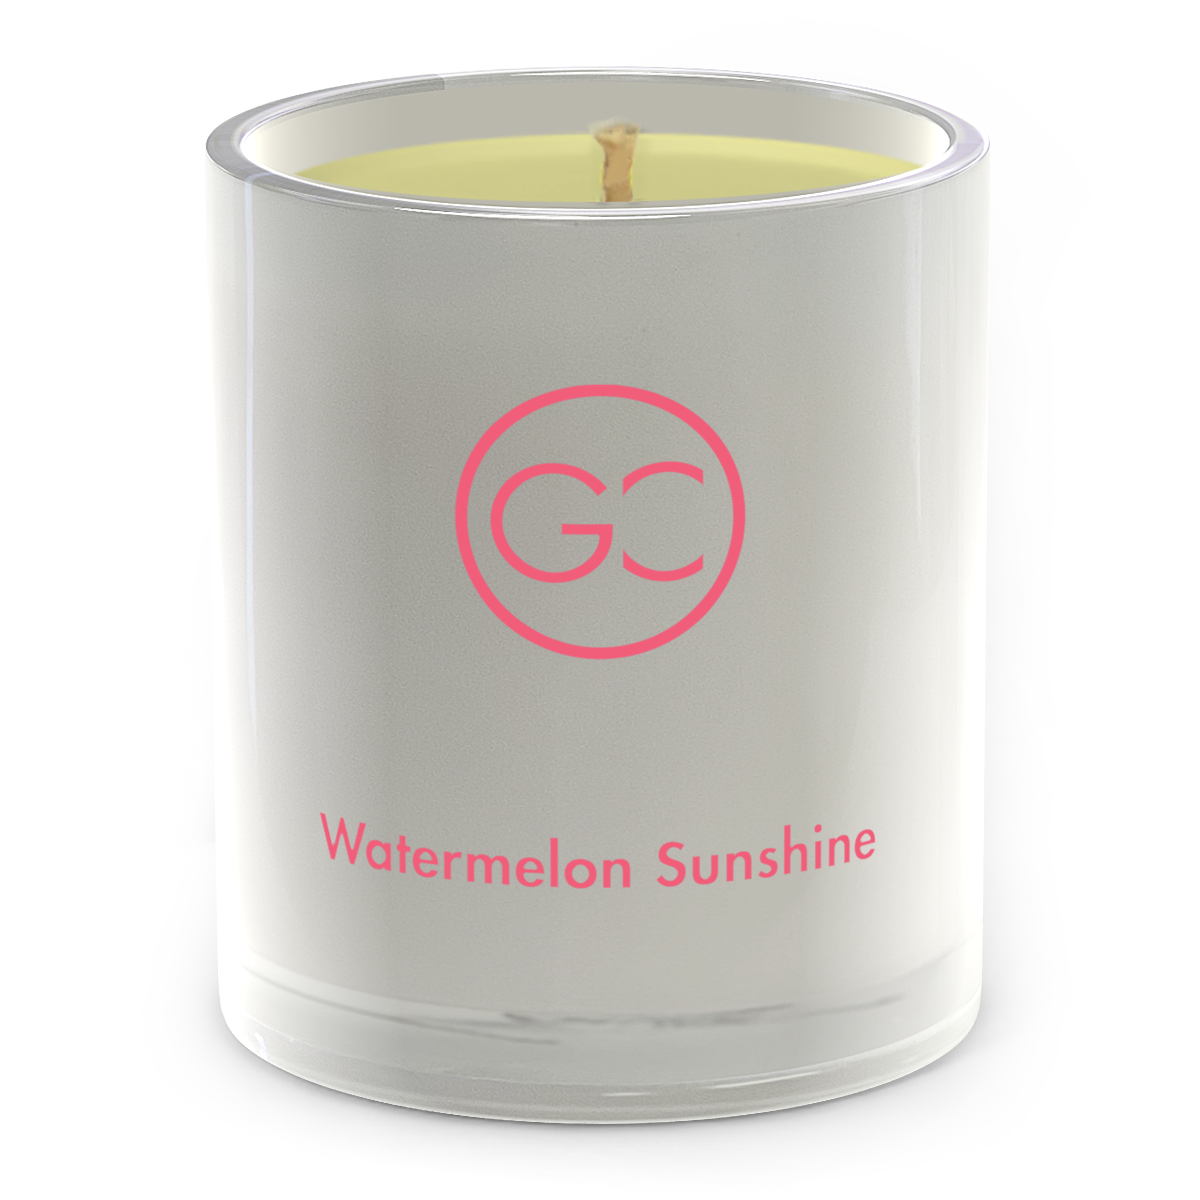 Watermelon Sunshine Scented Soy Candle 55hr Burn